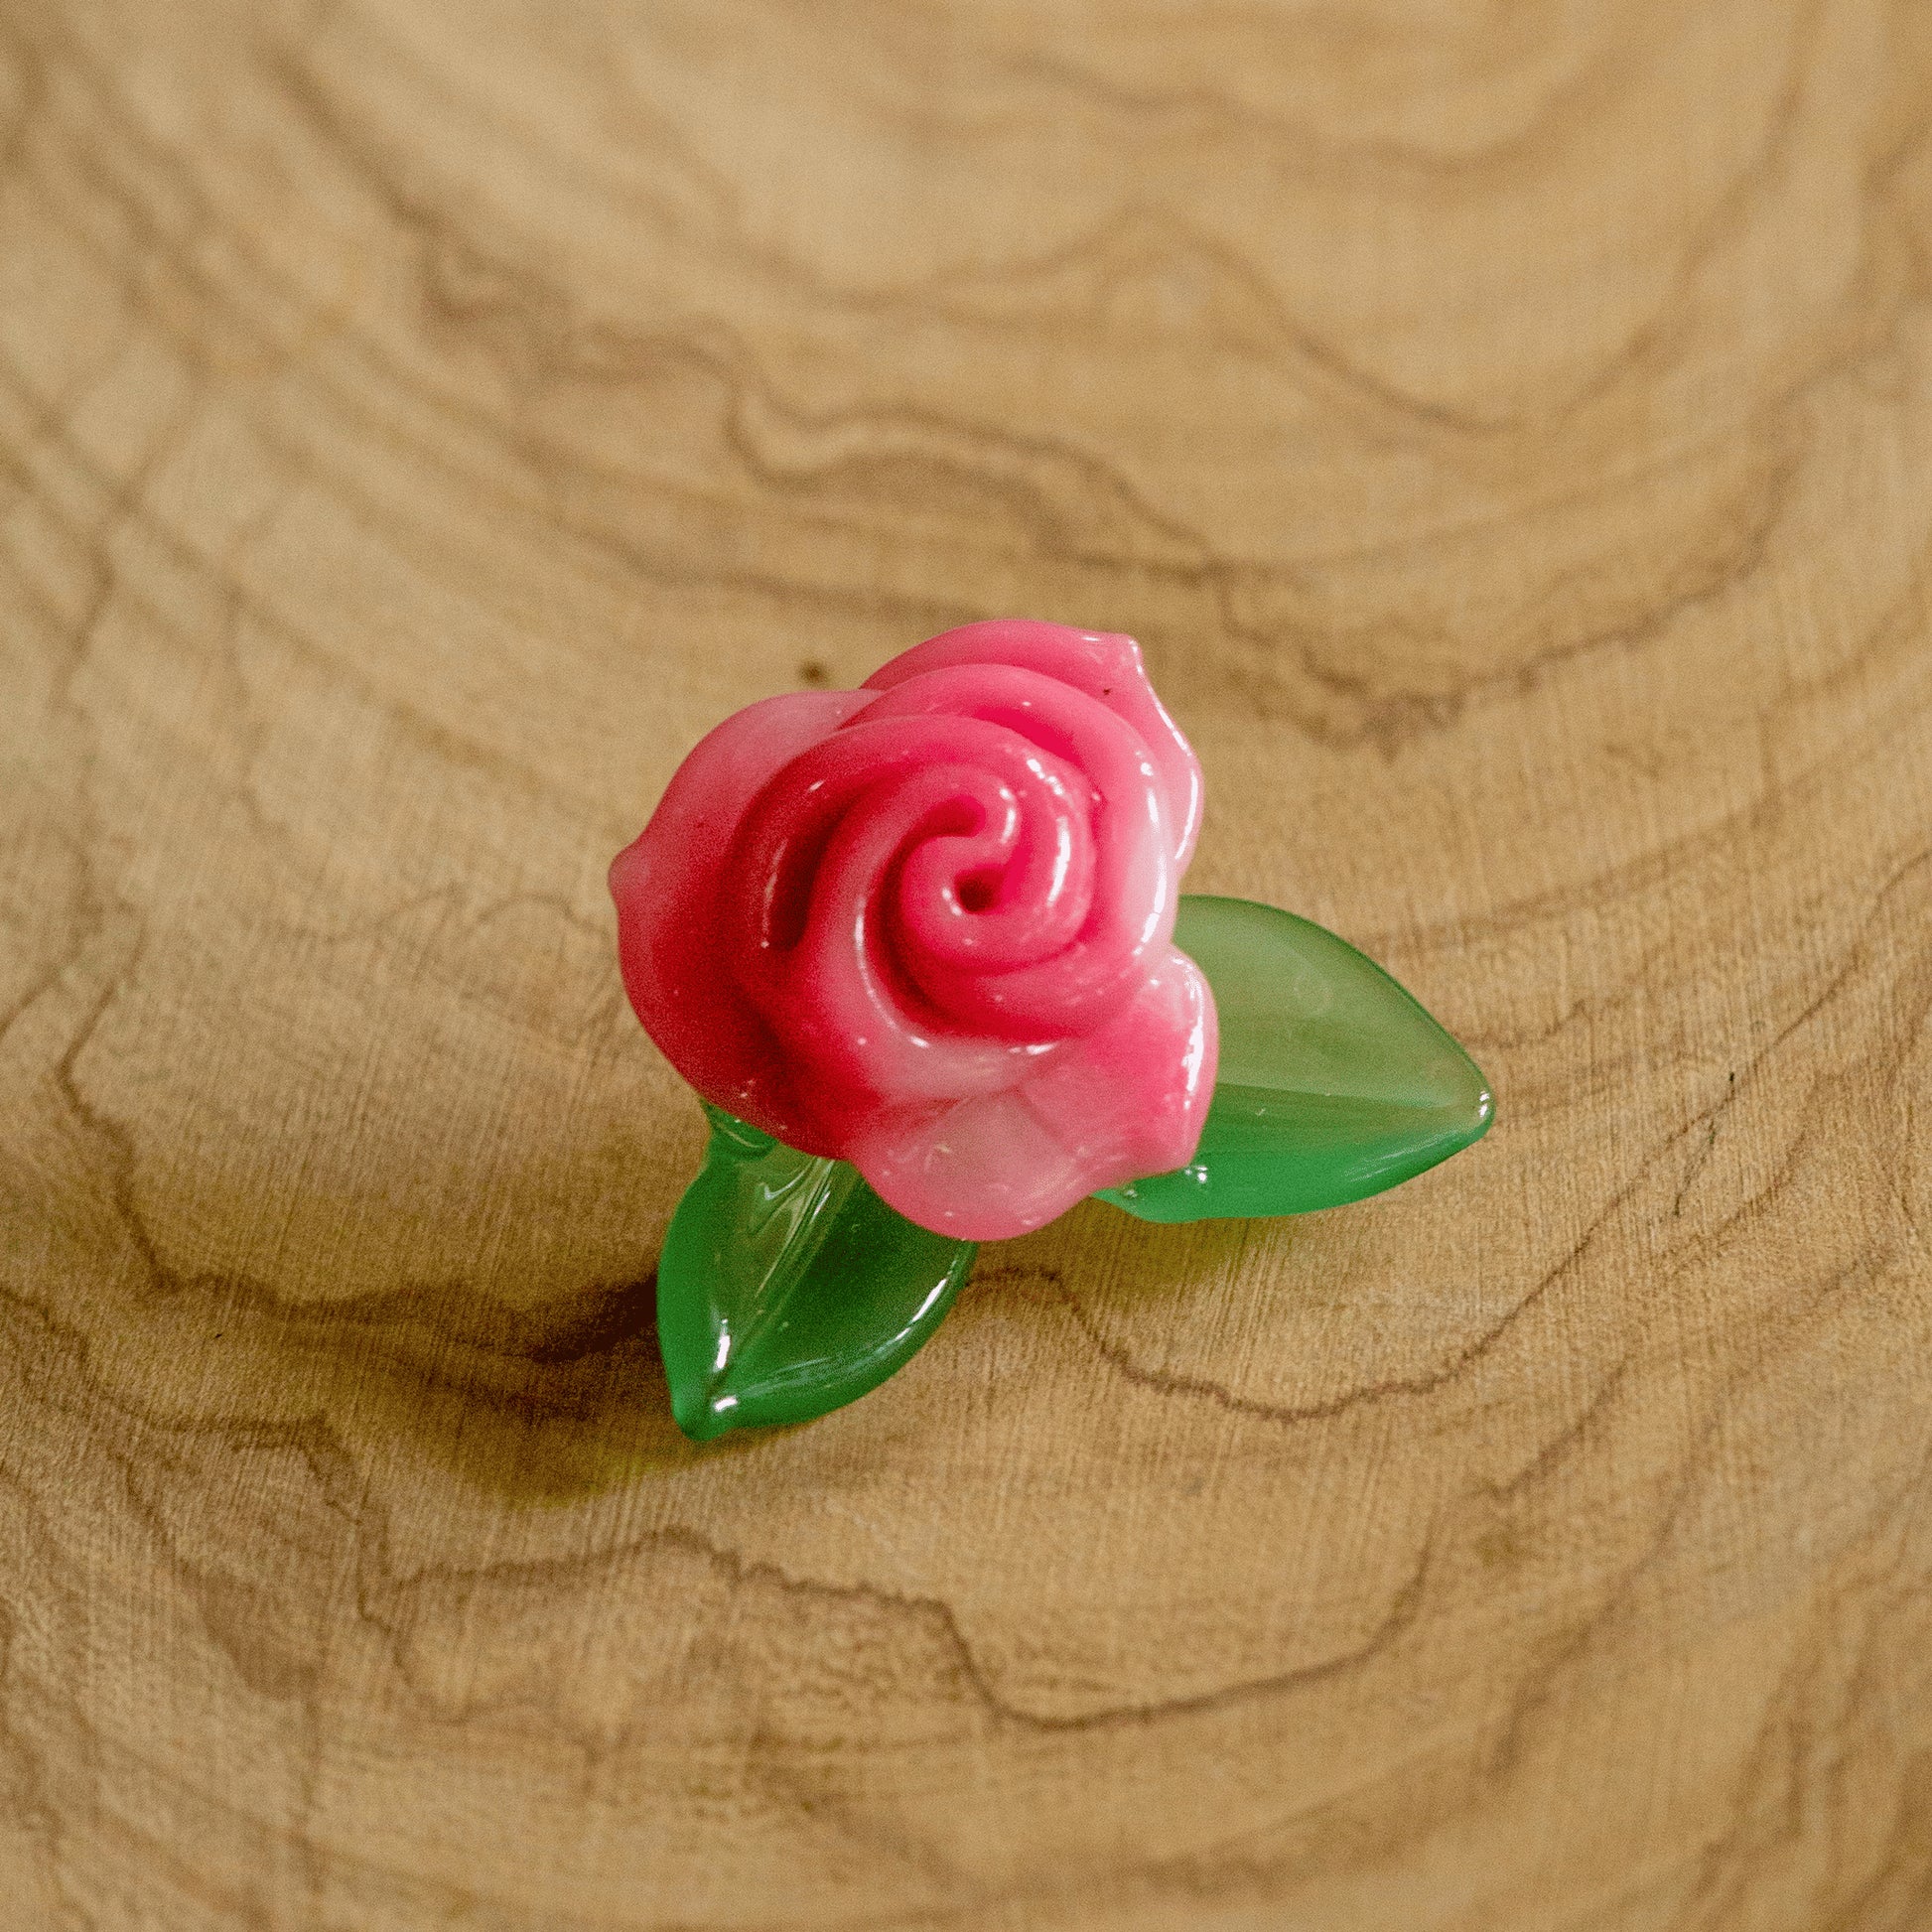 exquisite glass pendant - Pink Rose w/ Green Leaves Pendant (A) by Sakibomb